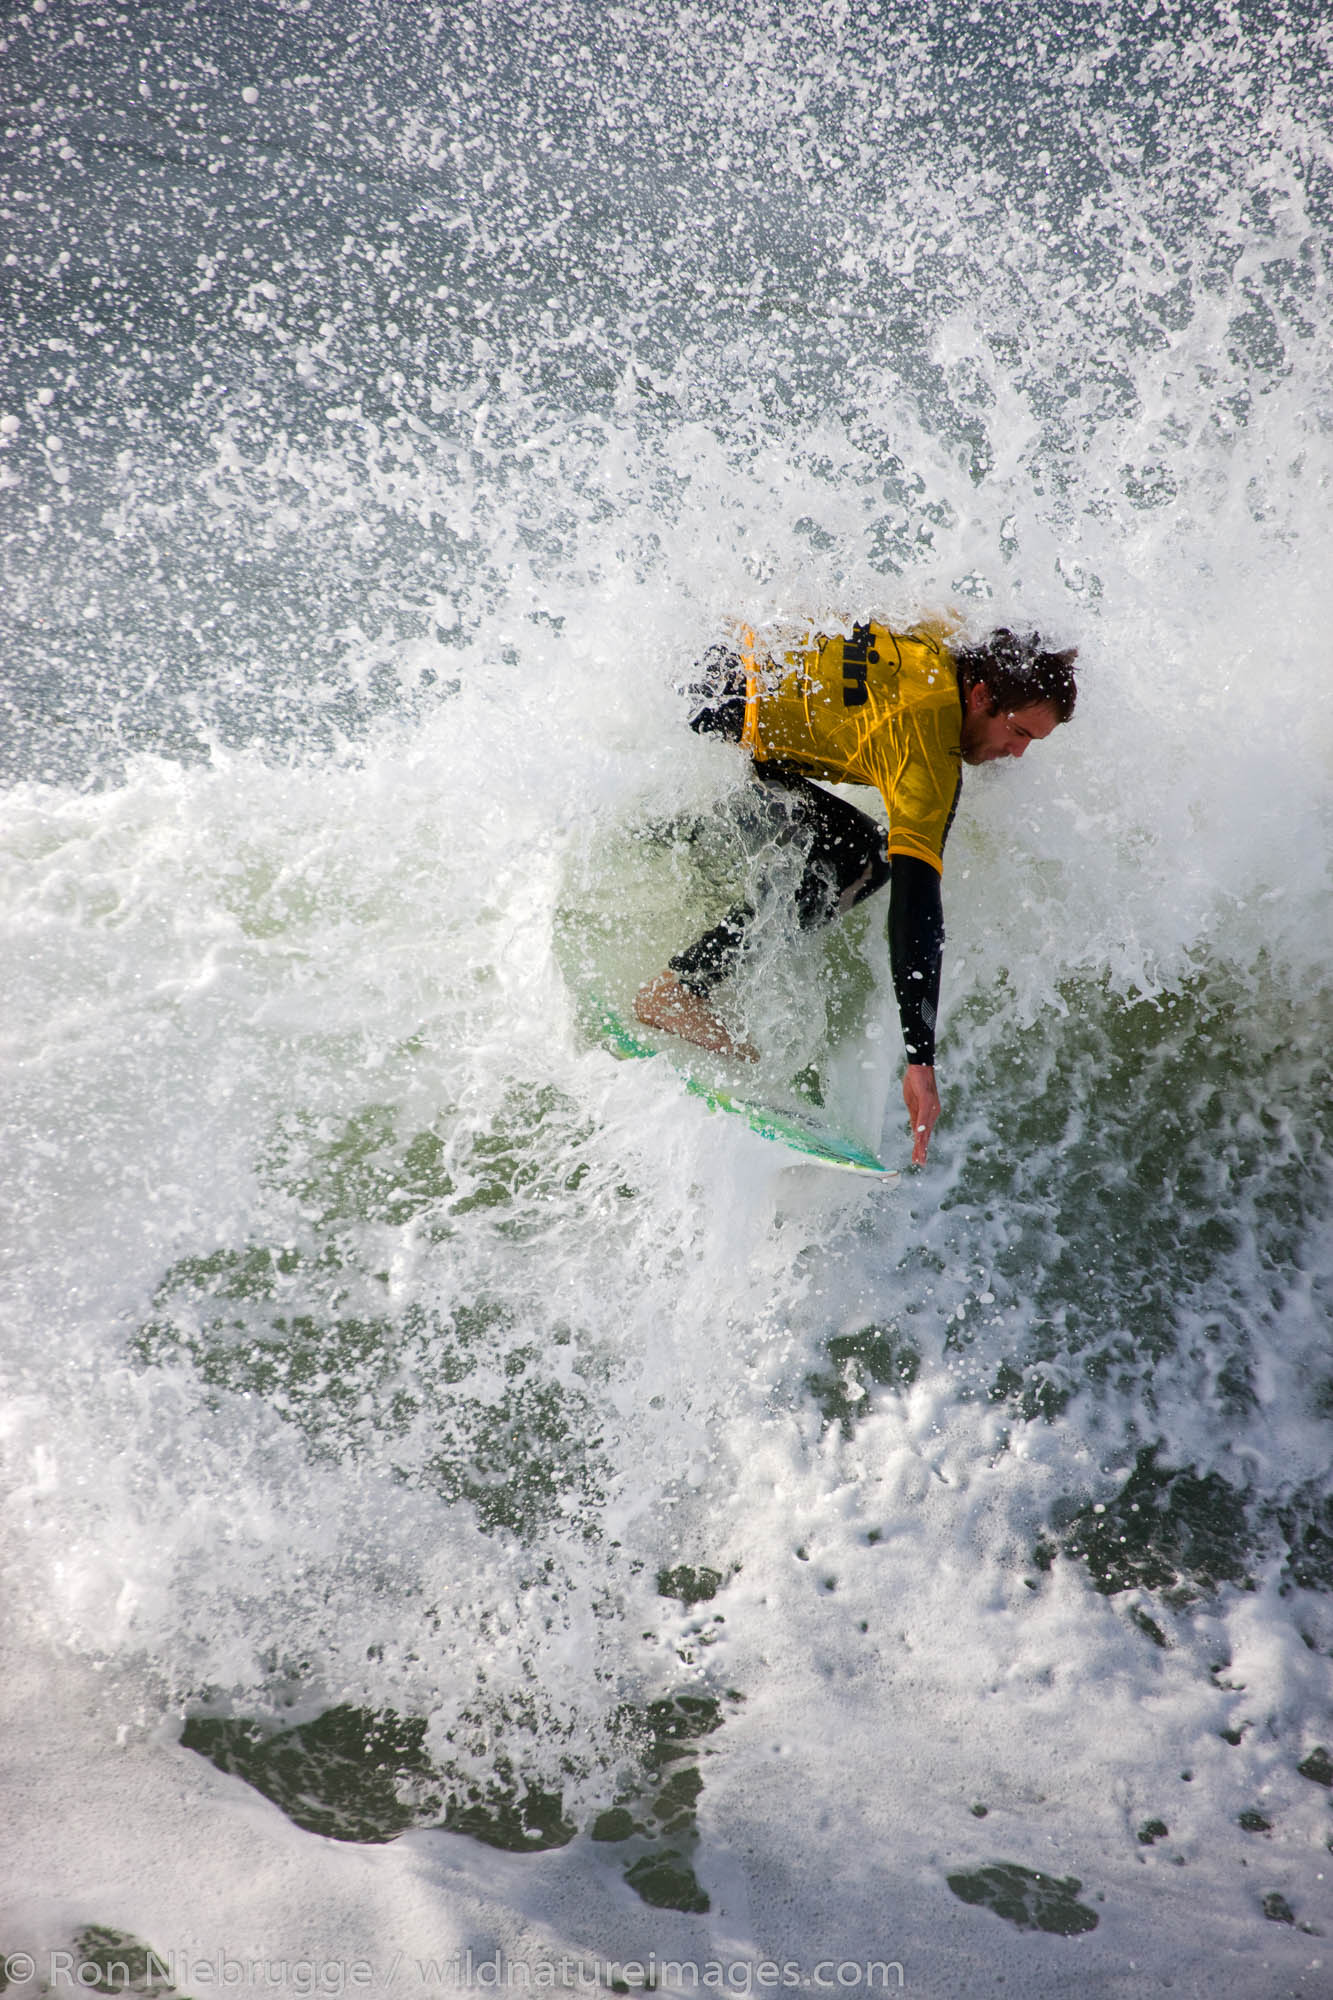 Pascal Stansfield competing in the Katin Pro/Am surf competition at Huntington Beach Pier, Orange County, California.